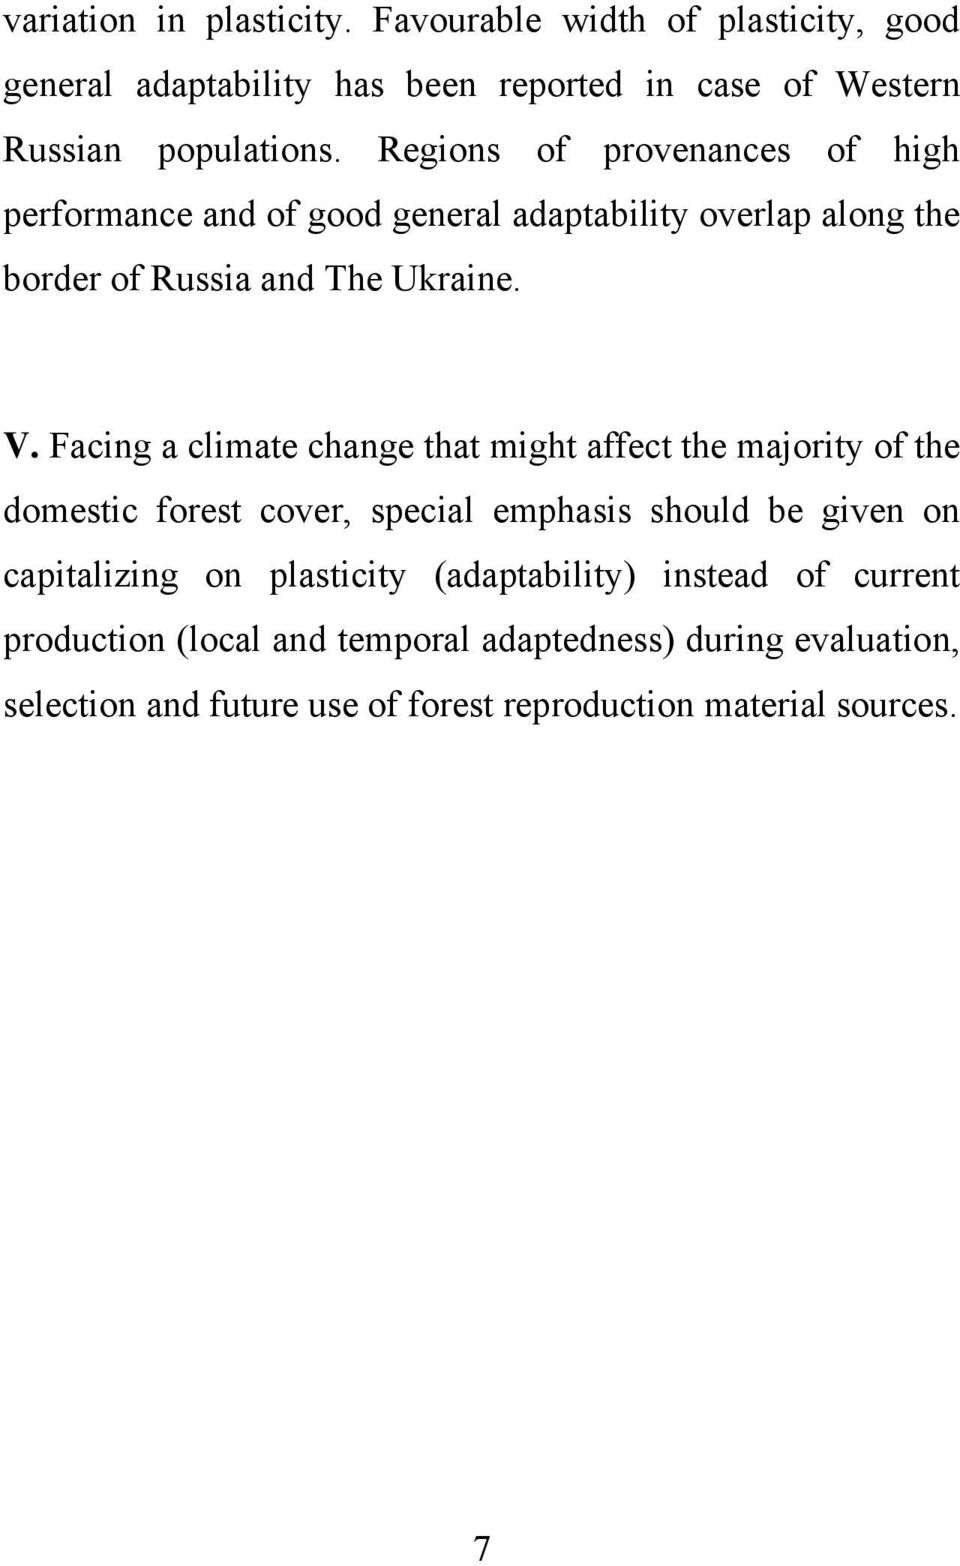 Facing a climate change that might affect the majority of the domestic forest cover, special emphasis should be given on capitalizing on